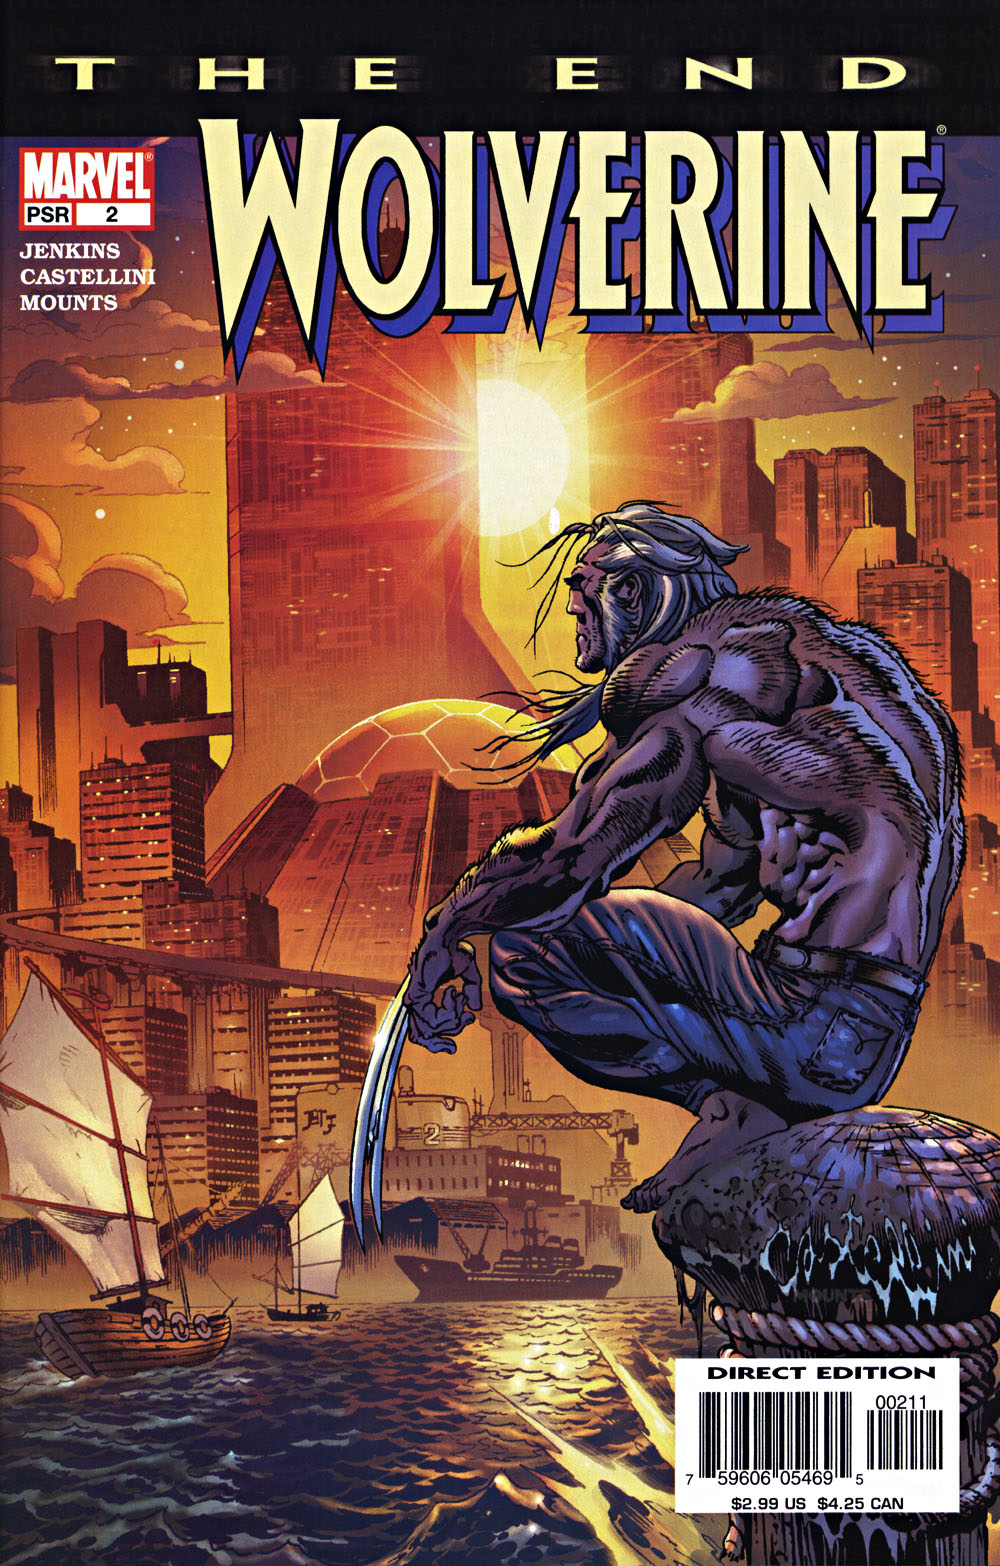 Wolverine: The End Vol. 1 #2